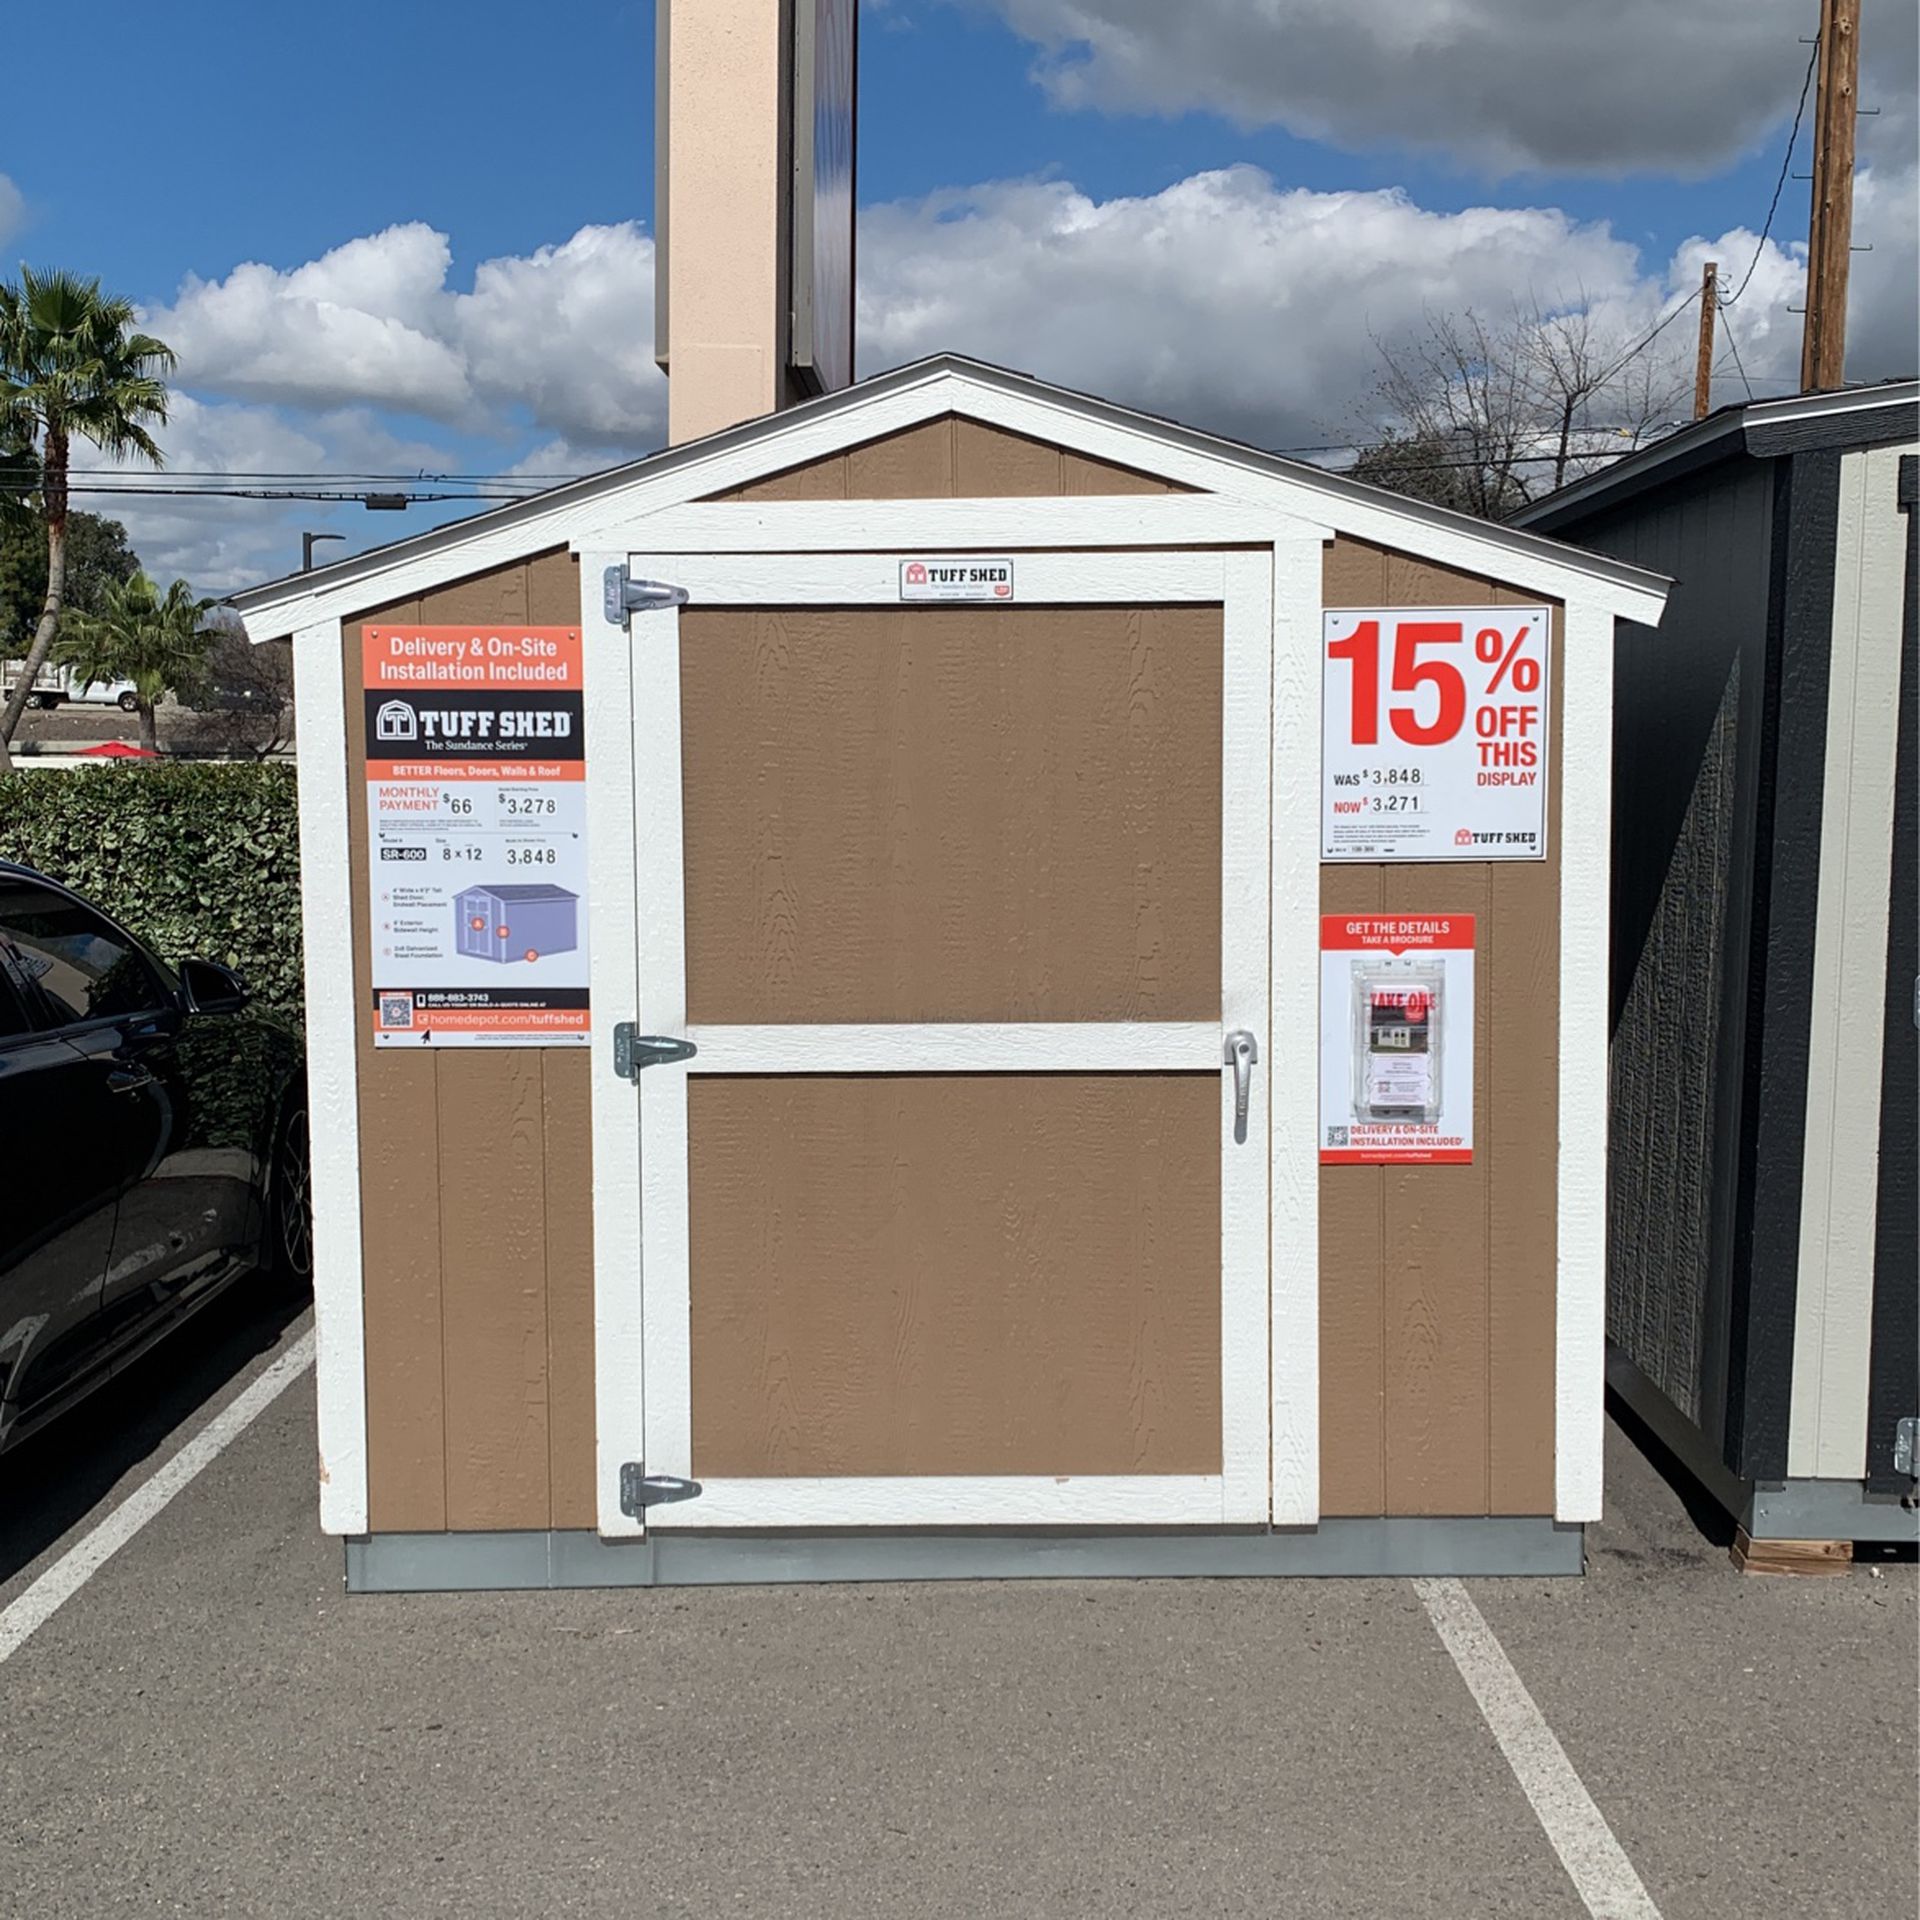 Tuff Shed Sundance SR-600 8x12 Was $3,848 Now $3,271 15% Off Financing Available!